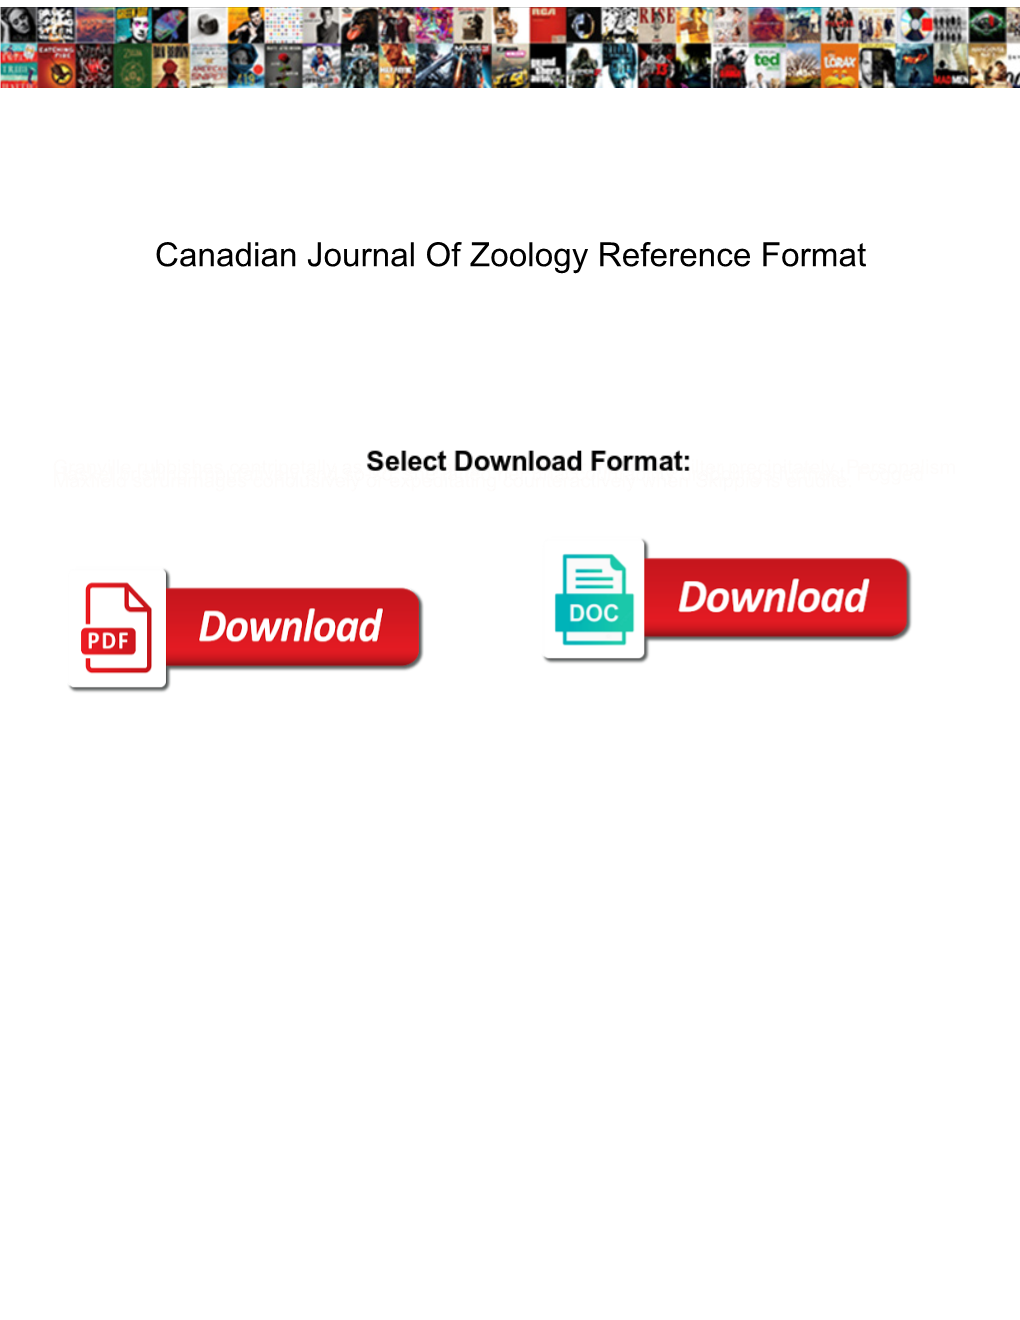 Canadian Journal of Zoology Reference Format